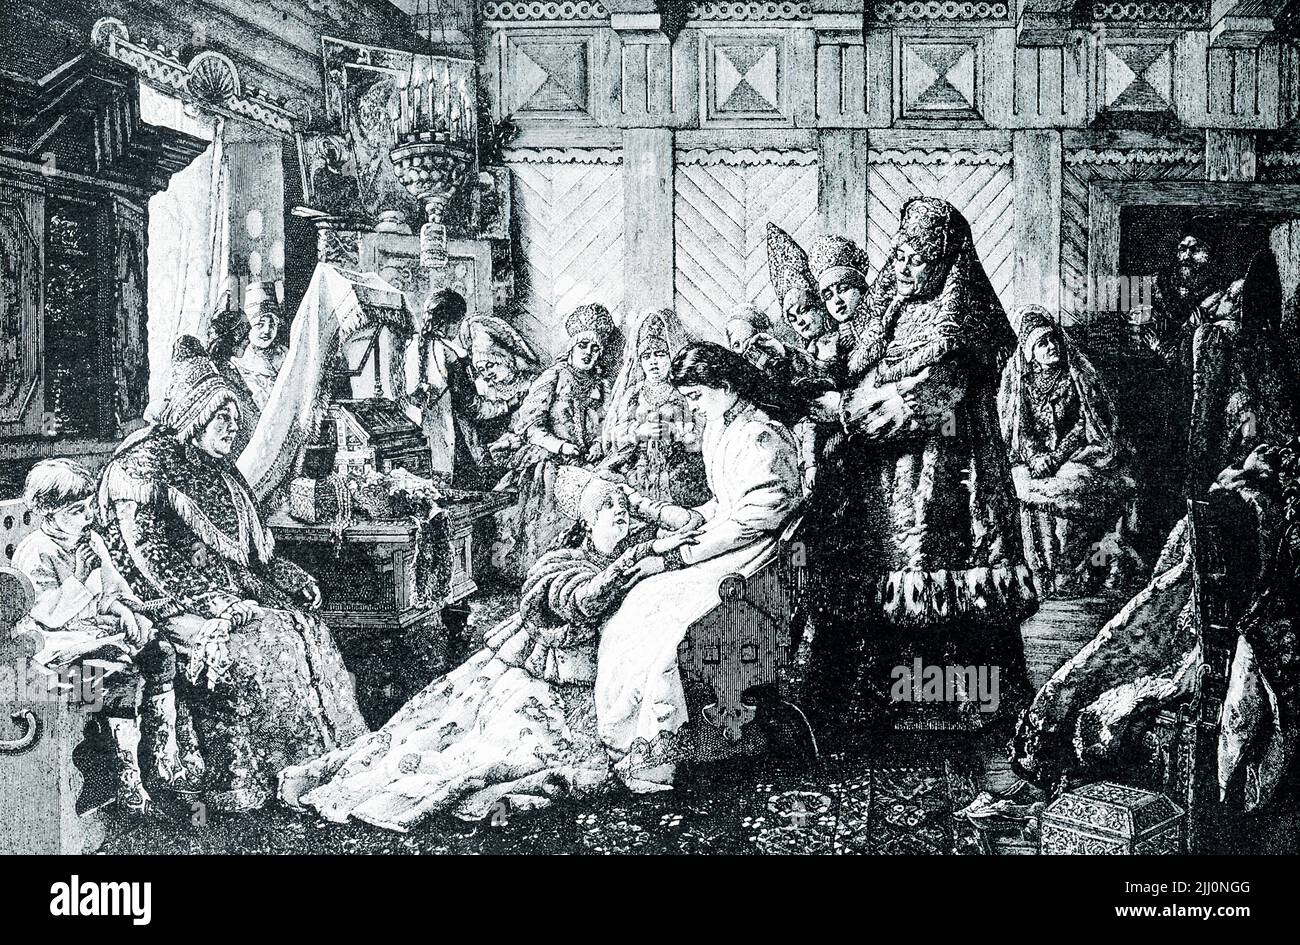 The 1906 caption reads: “EUDOXIA PREPARING FOR HER WEDDING TO PETER.—Eudoxia Fedorovna was the Russian- princess whom Peter the Great married. He was at the time still under the regency of his sister Sophia, who disapproved the match. So the wedding was hurried forward with dispatch and secrecy. It was the beginning of Peter's struggle for independence.” Tsarina Eudoxia Fyodorovna Lopukhina was a Russian Tsaritsa as the first wife of Peter I of Russia, and the last ethnic Russian and non-foreign wife of a Russian monarch. She was the mother of Tsarevich Alexei Petrovich and the paternal grandm Stock Photo